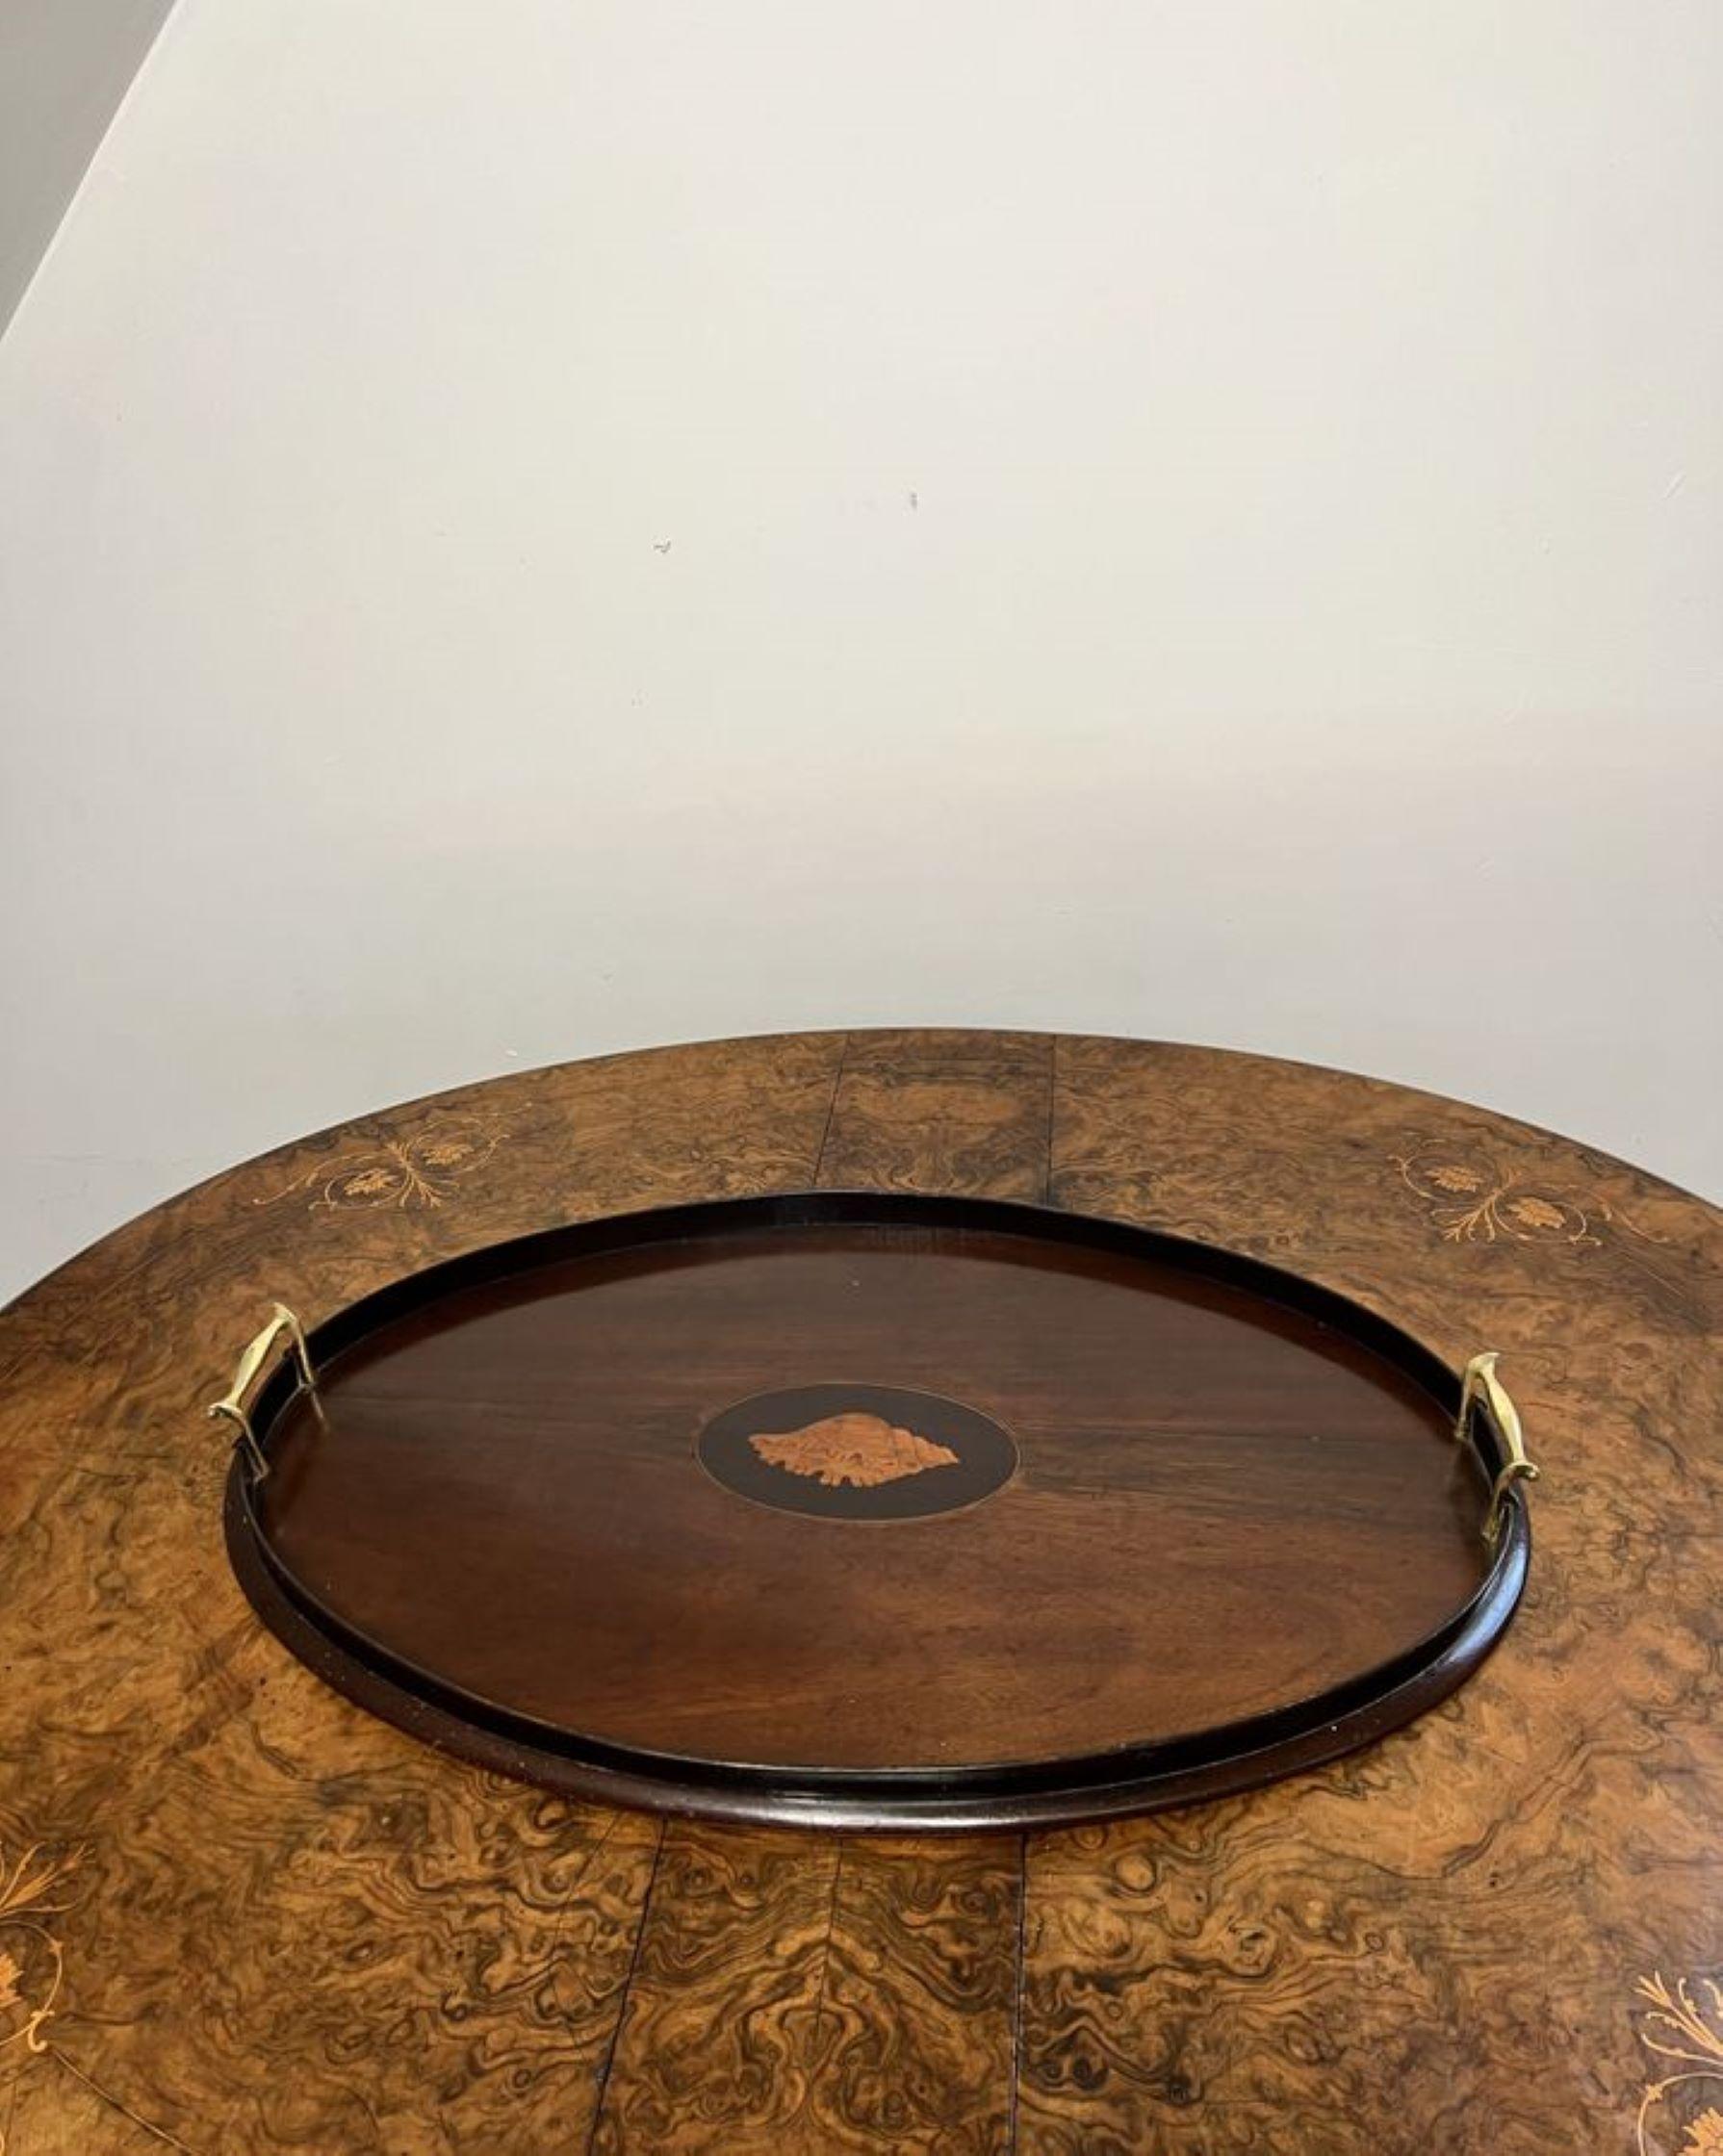 Quality antique Edwardian mahogany inlaid oval tea tray having a quality mahogany inlaid shell to the centre of the tray with a gallery edge and the original brass carrying handles

D. 1900